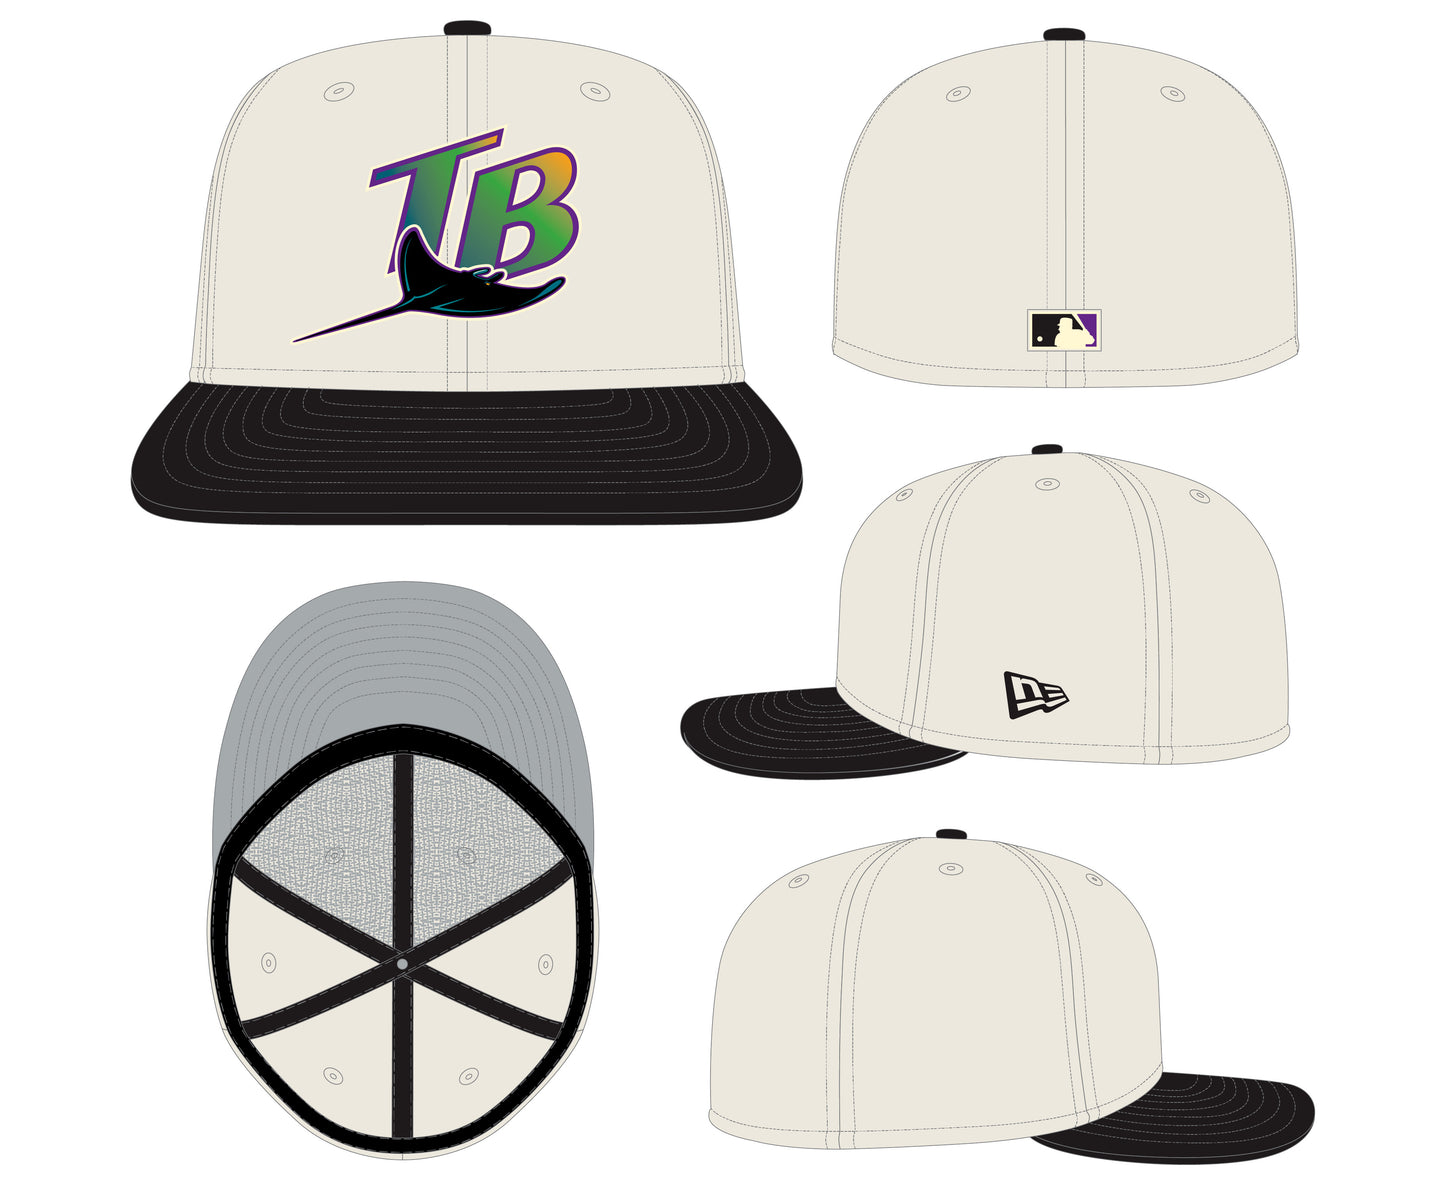 Tampa Bay Devil Rays Cooperstown Collection Cream/Black Leather Visor New Era 59FIFTY Fitted Hat